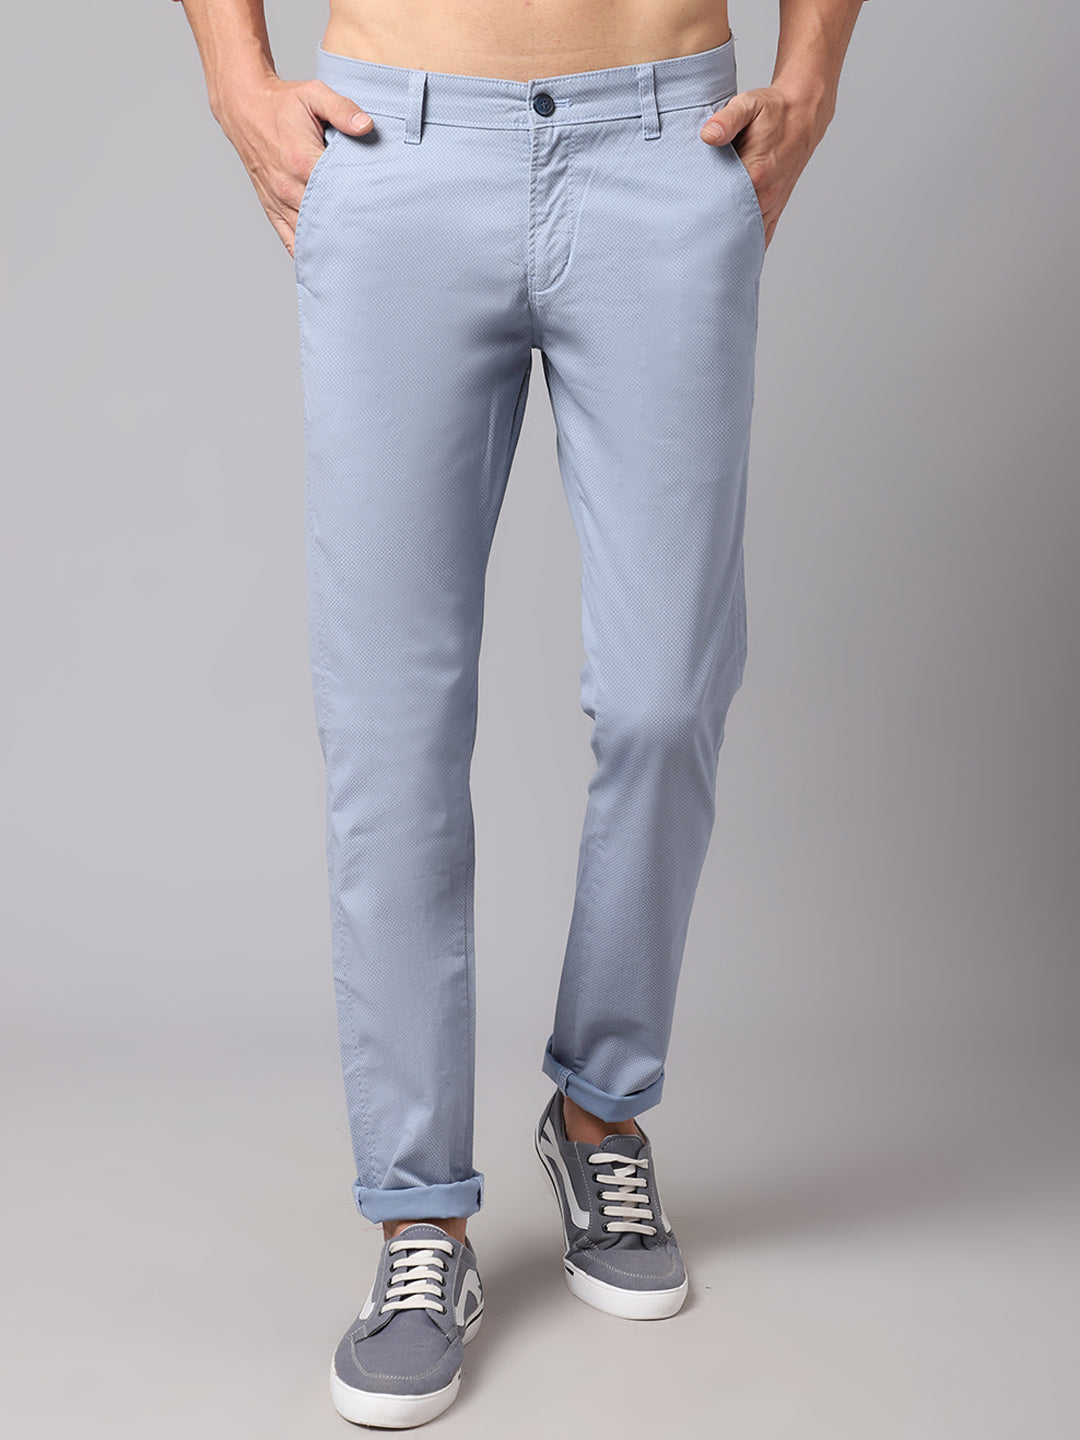 Light Blue Check Trousers - Selling Fast at Pantaloons.com